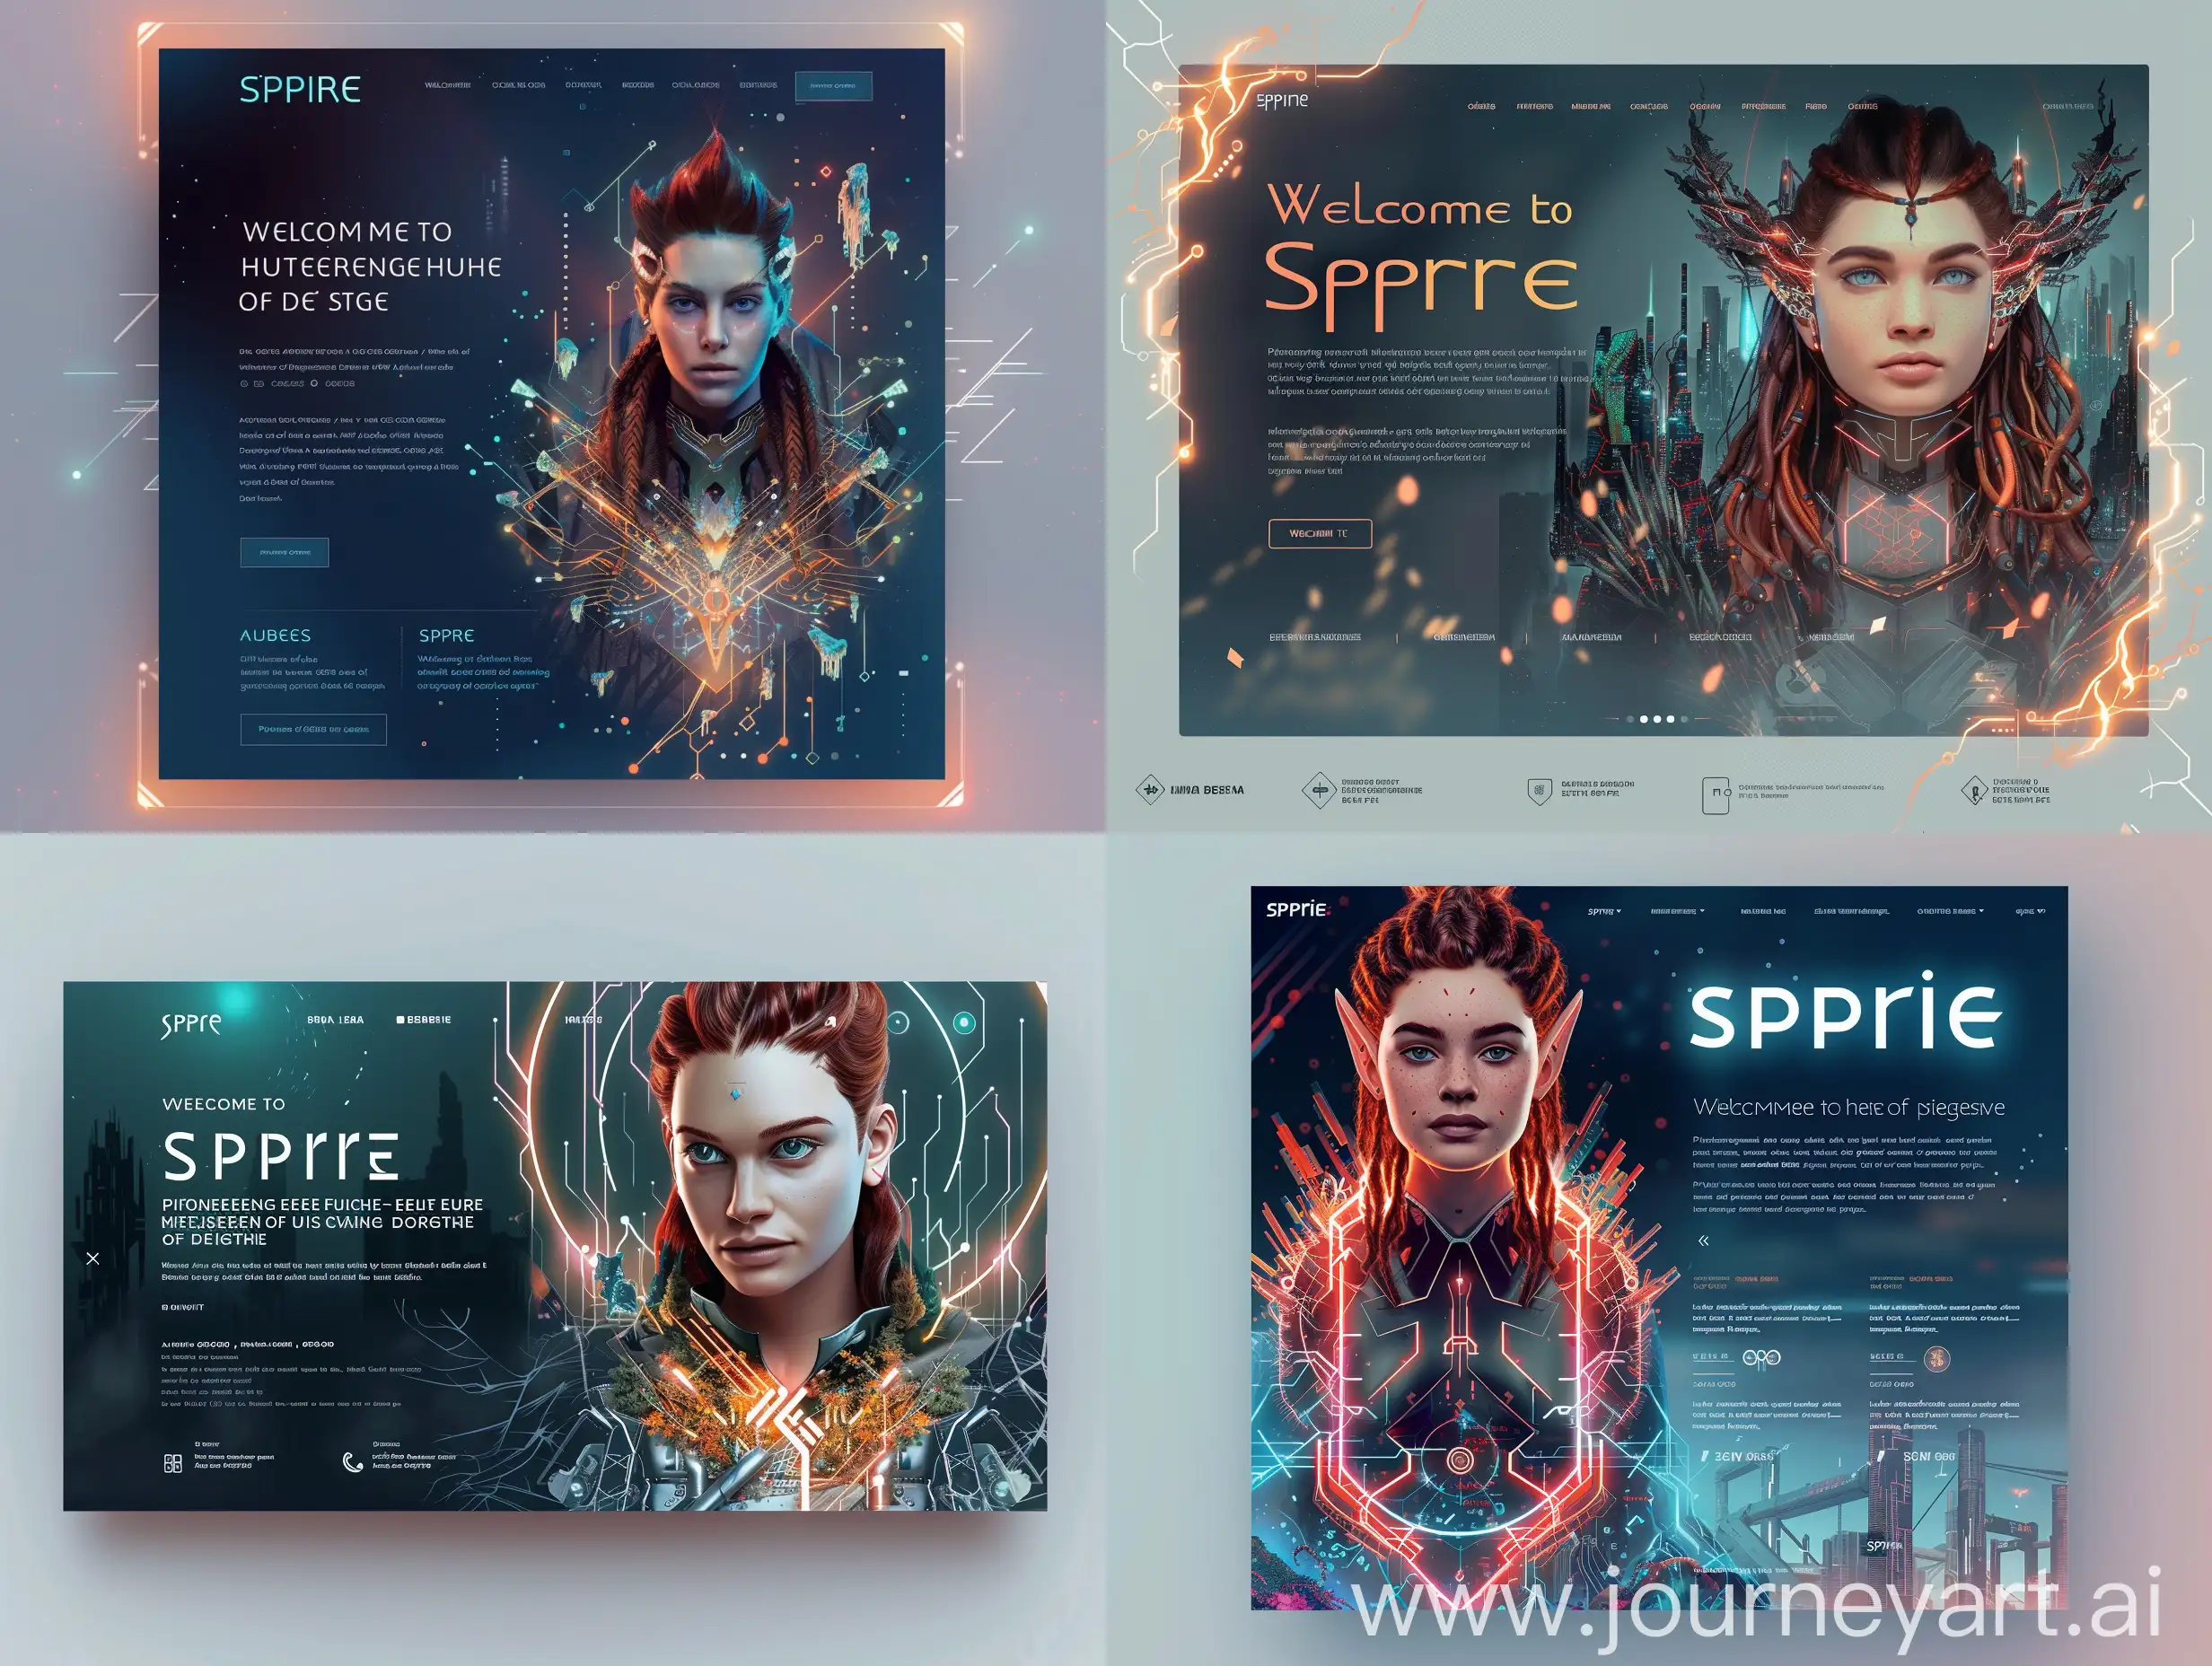 "Design the first sheet for the 'Spire' Behance project minimal 3D hyper realism and glossy style template, titled 'Welcome to Spire,' inspired by 'Horizon: Zero Dawn' and 'Ghost in the Shell.' The header should feature the project title 'Spire' in a bold, modern font like Futura or Roboto, 72px, with the tagline 'Pioneering the Future of Industrial Design' in a slightly smaller font like Helvetica Neue, 36px. Use a background gradient transitioning from (#eeeeee) at the top to metallic silver (#C0C0C0) at the bottom, with glowing neon accents in soft white (#F5F5F5).
Include an introduction paragraph that provides a brief overview of Spire’s mission and vision, written in a clean, readable font like Arial or Open Sans, 24px, deep blue (#1E3A8A). The main visual should prominently feature the character Aurora, centered and surrounded by glowing, nature-inspired circuits and technology motifs. Incorporate a futuristic cityscape or nature elements with cyberpunk enhancements to enhance the visual appeal. Ensure the background includes subtle, interactive elements like small animations and hover effects to engage users.
The footer should contain links to social media, contact information, and additional resources. Maintain a consistent style throughout, ensuring the design is responsive and user-friendly, with a focus on usability and accessibility."3D hyper realistic  web design style